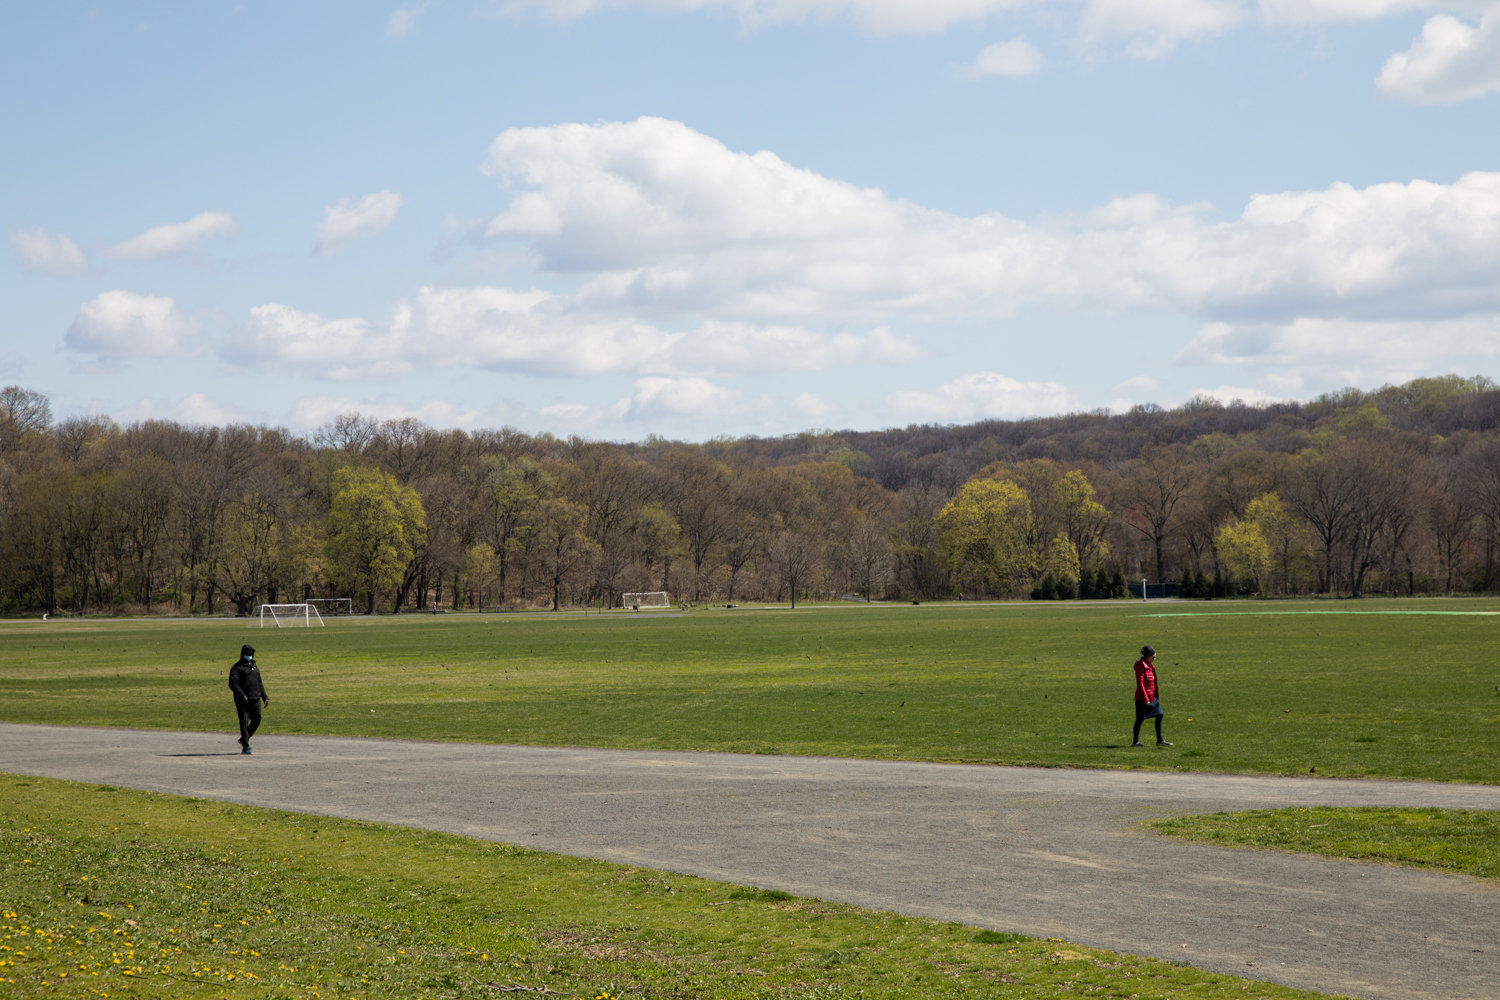 Park goers can have an unobstructed walk in Van Cortlandt Park now that fencing has been removed from an area that was supposed to the site of a new emergency field hospital to treat COVID-19 patients.